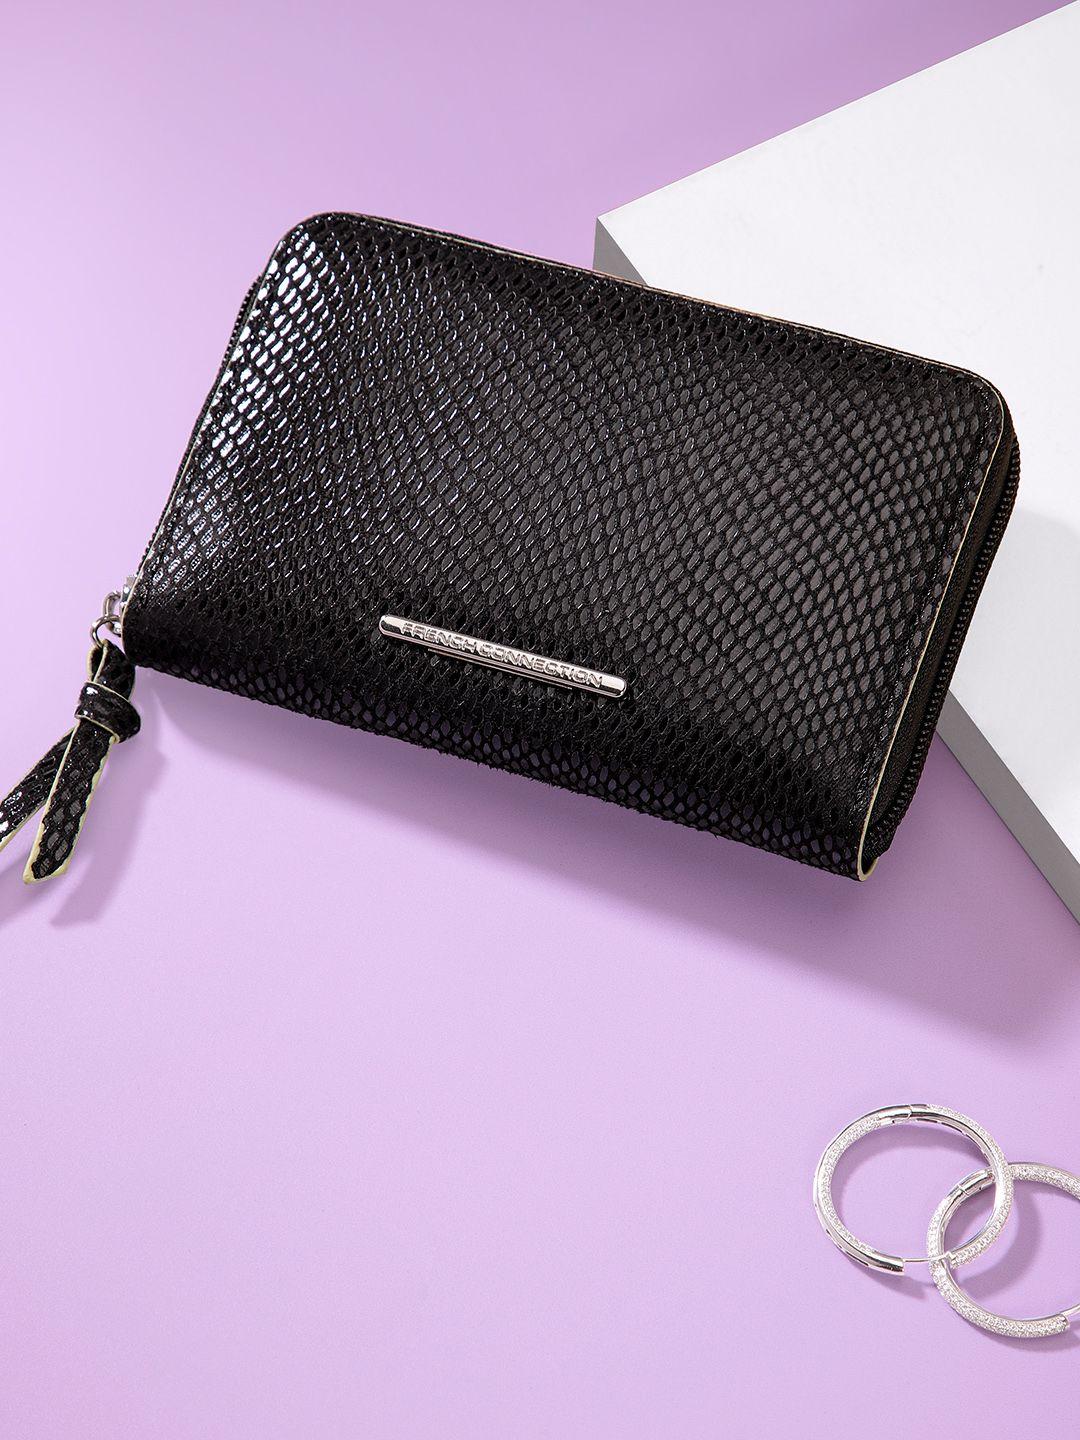 french-connection-women-textured-leather-zip-around-wallet